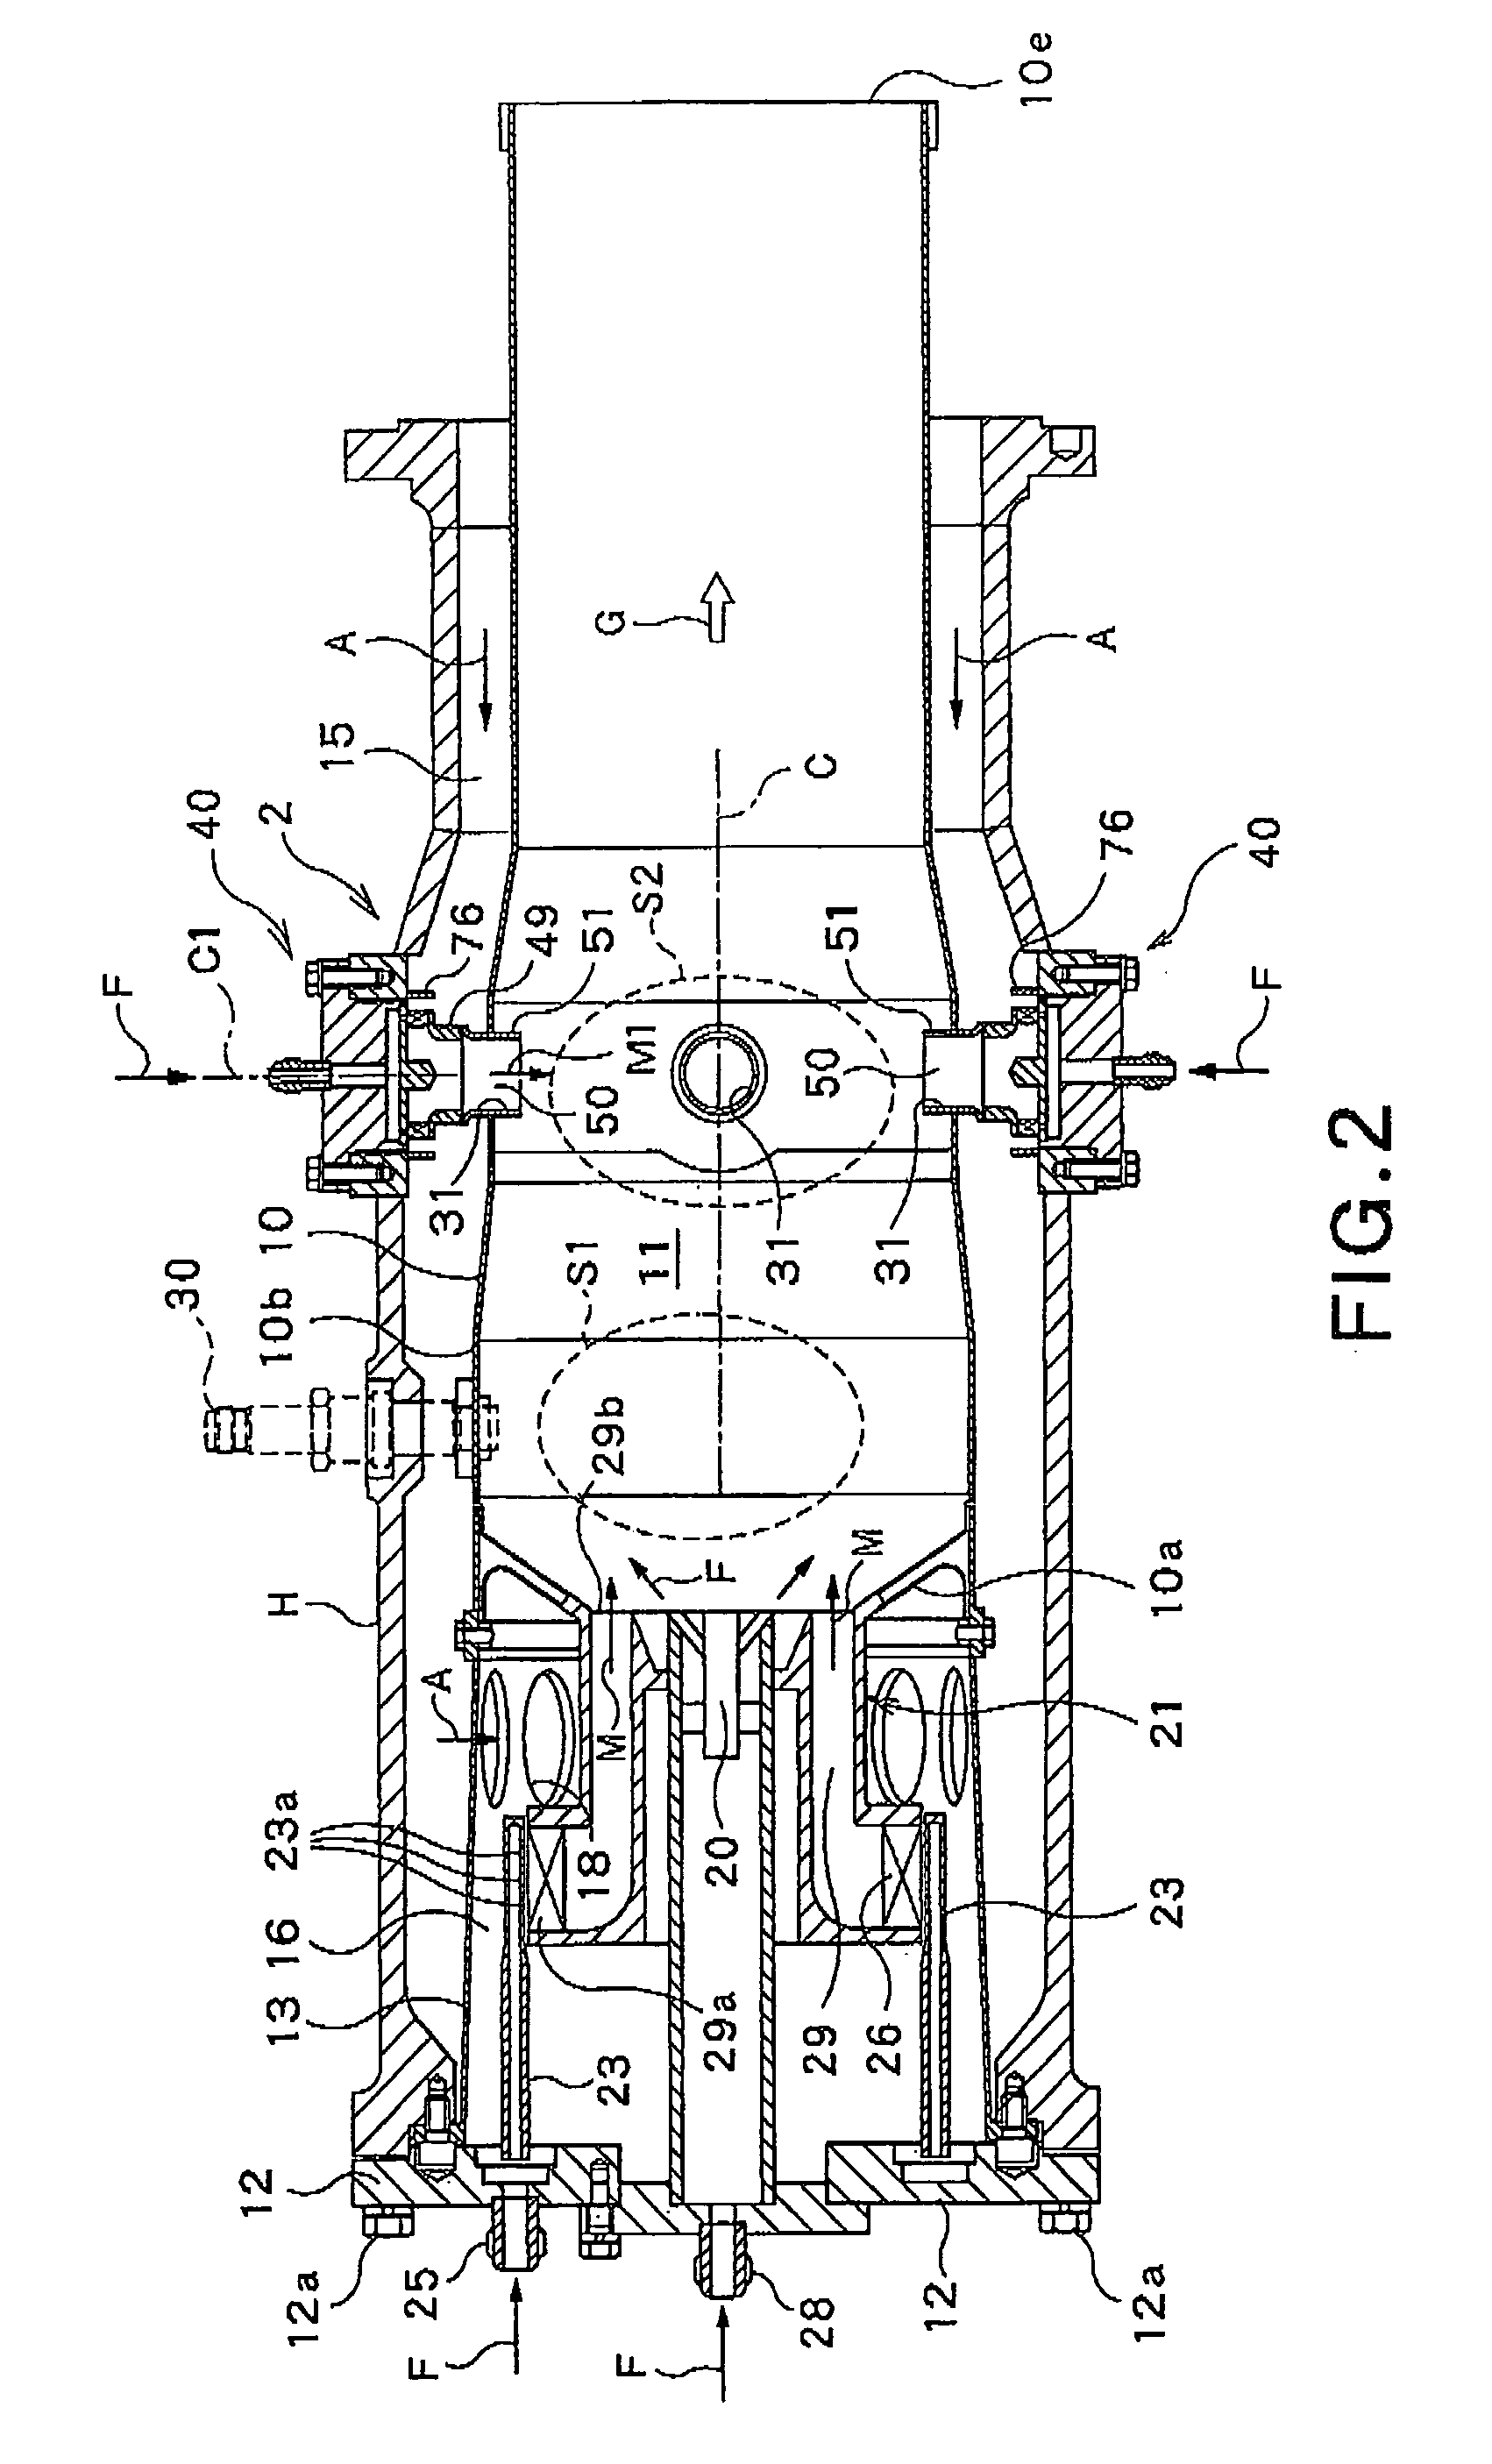 Gas turbine combustor including separate fuel injectors for plural zones